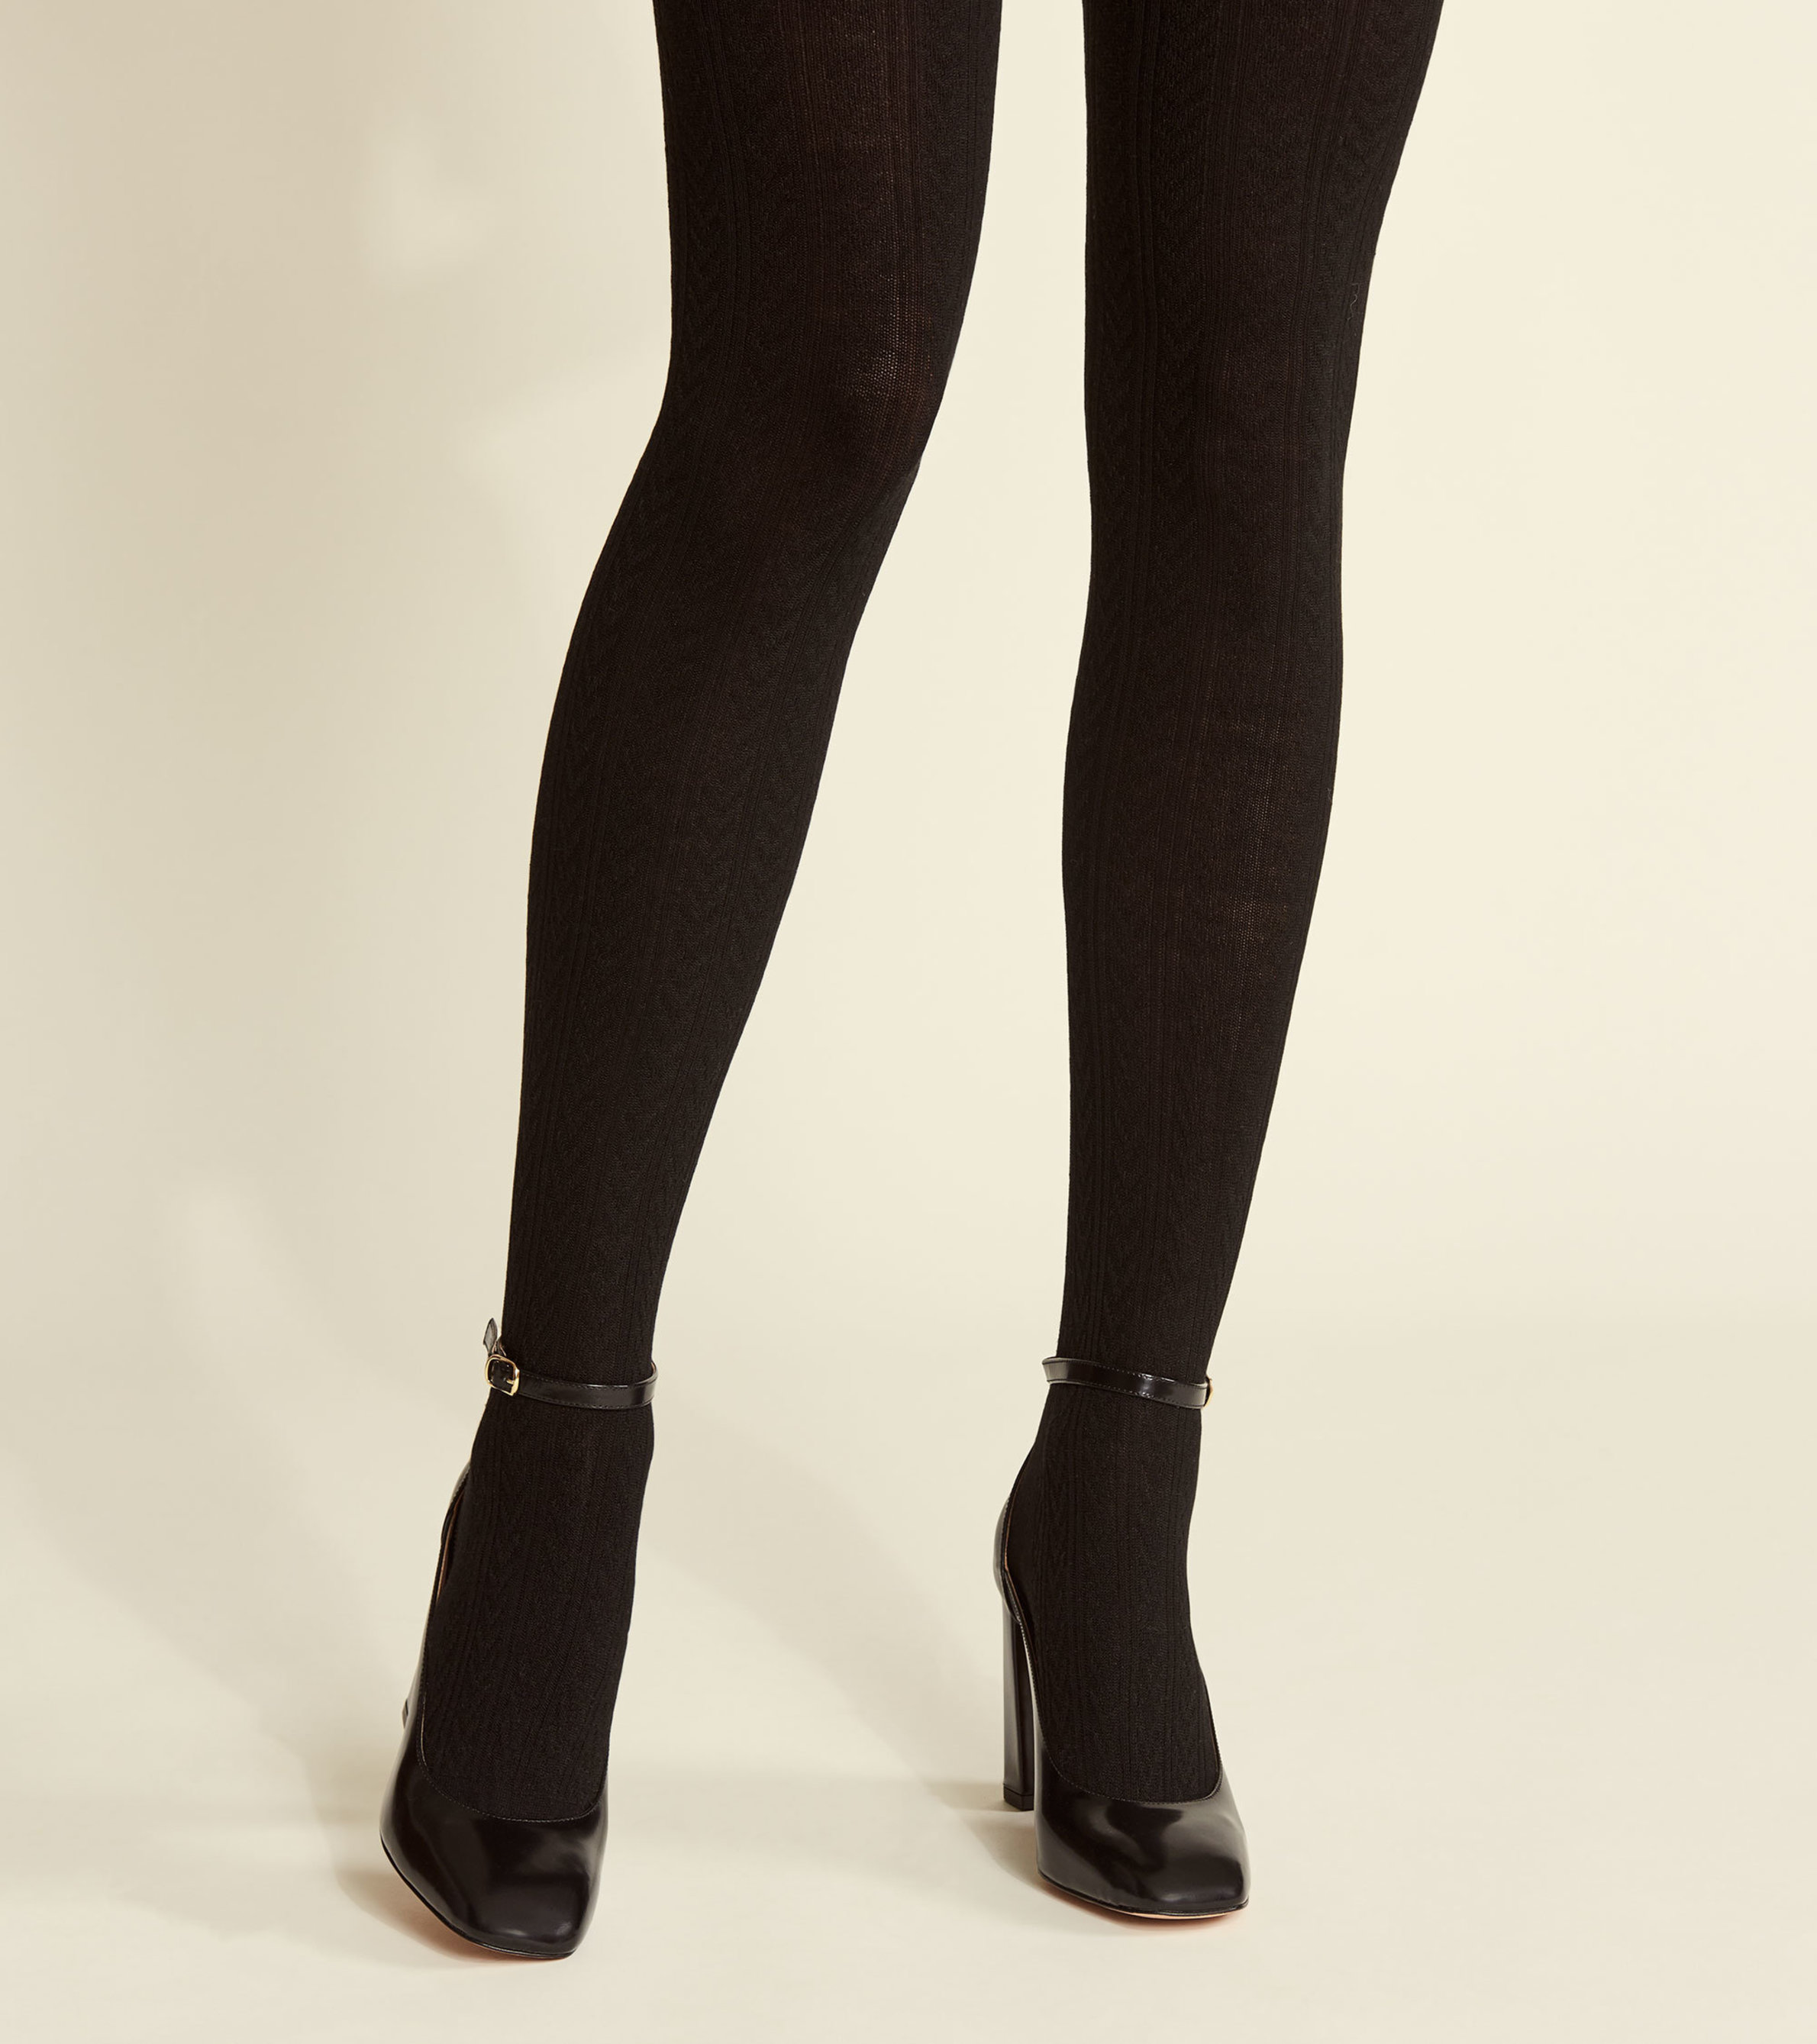 Buy Jet Black Acrylic Winter Tights Online - Shop for W